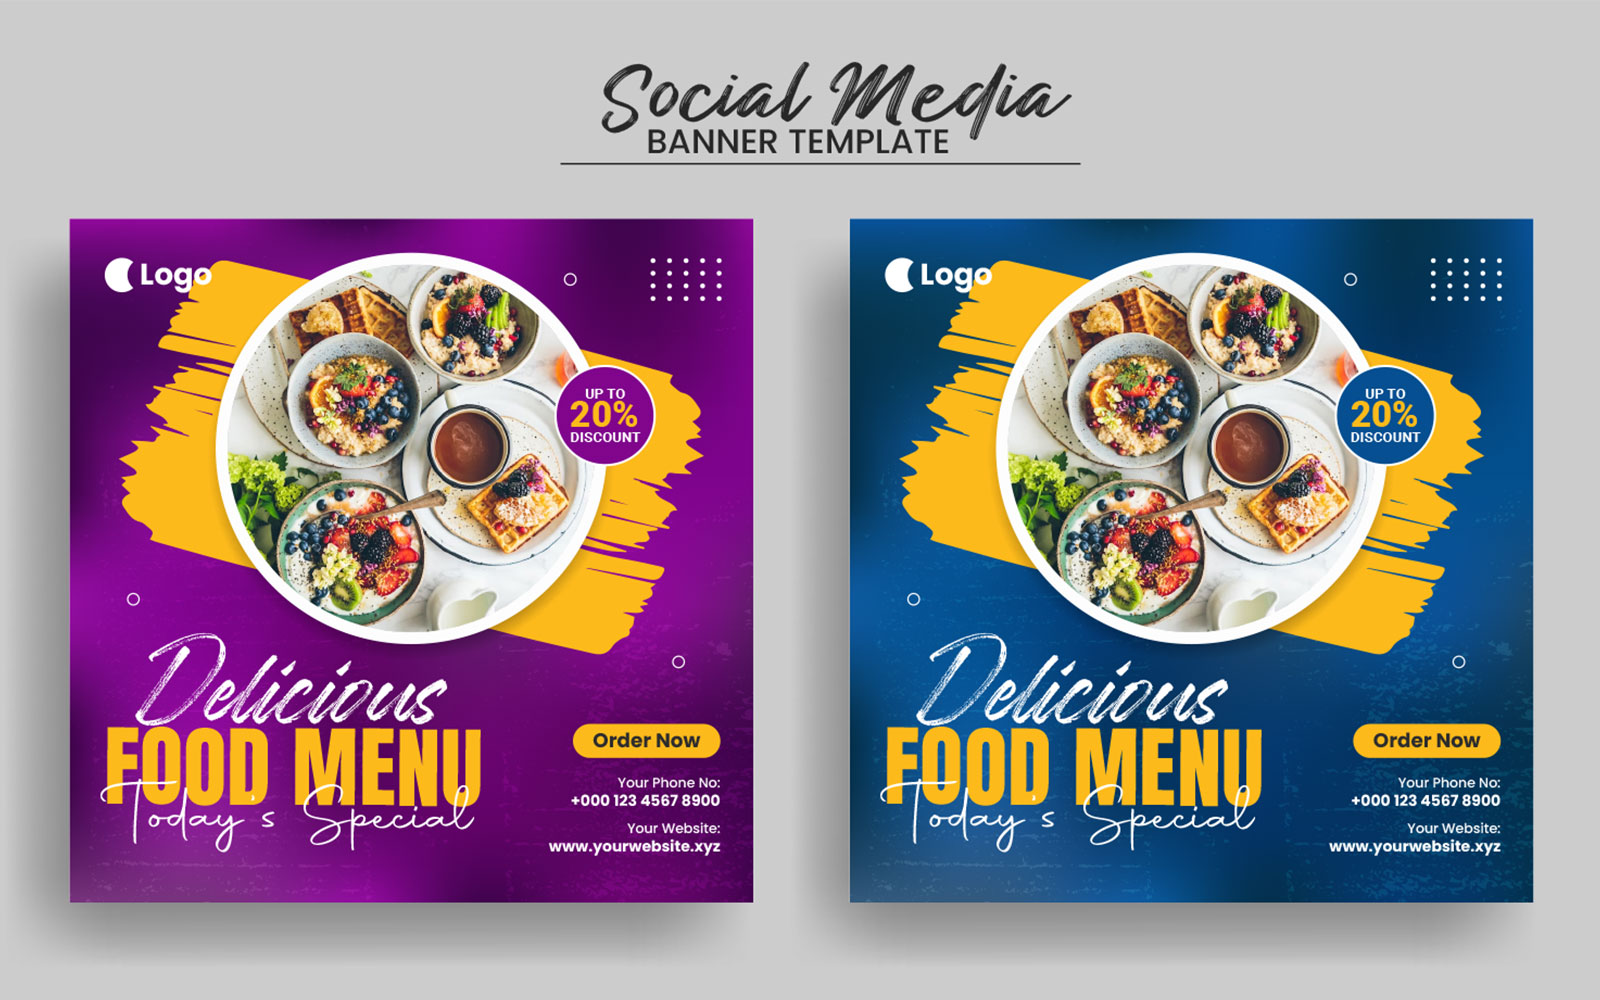 Delicious Food Menu Social Media Promotion and Web Banner Design Template